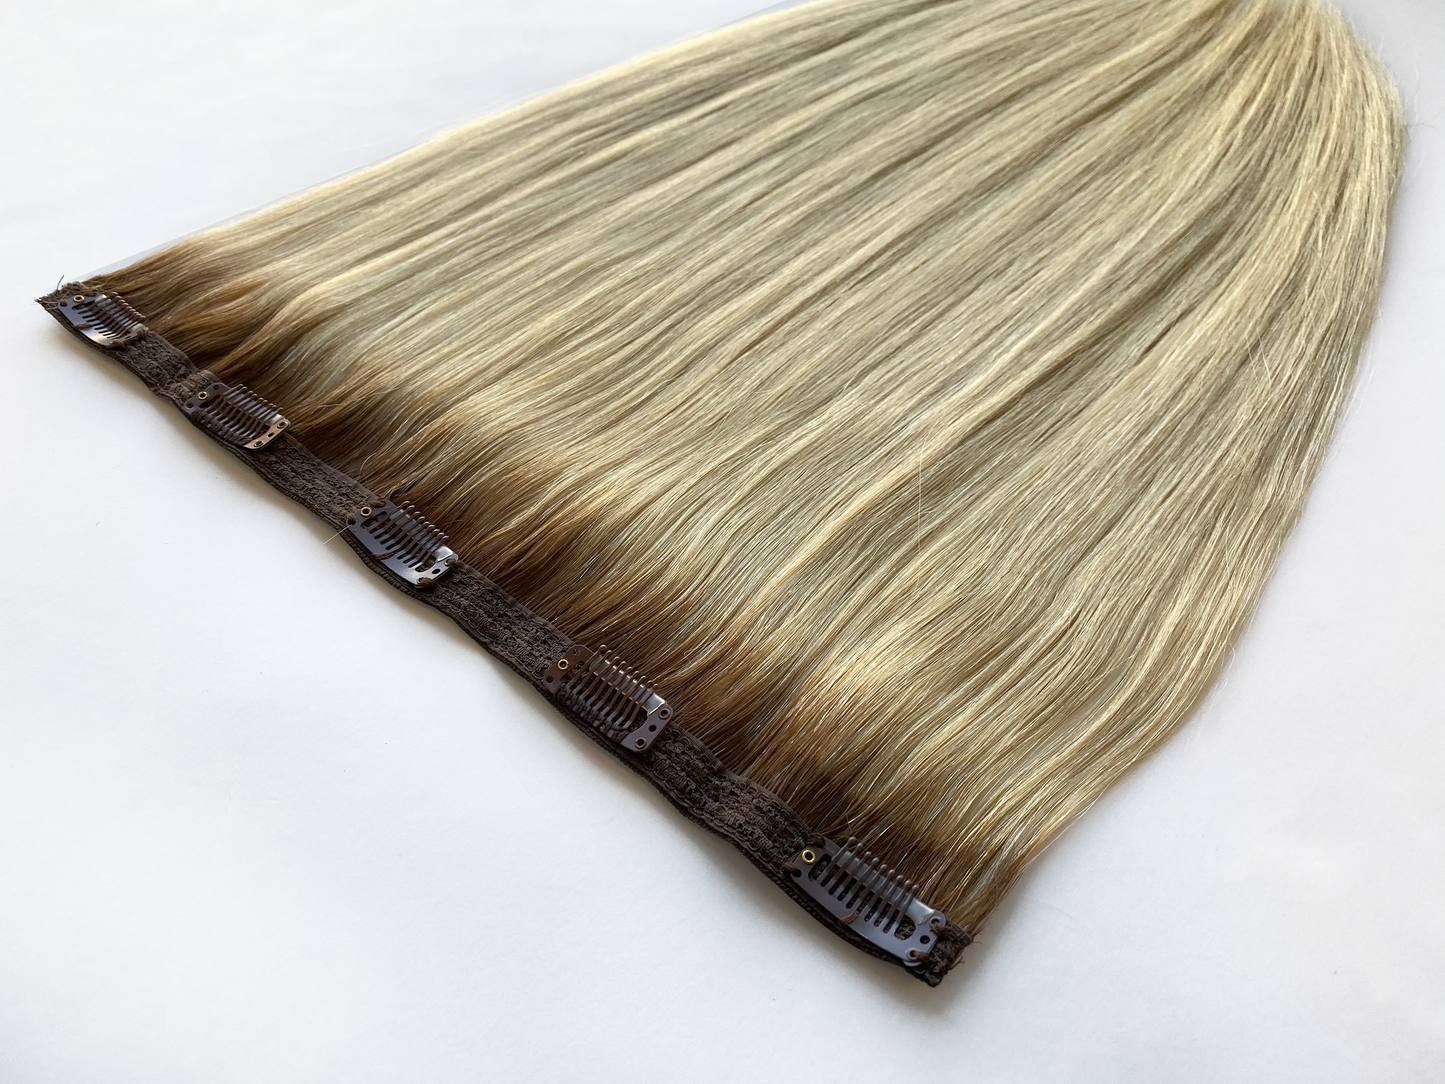 Extra Thick Clip-in Hair - Silky Straight 68g, 75g, 90g - Clip-ins - D-Lux - The Best Quality Remy Hair wefts, and shop the best quality remy hair Extensions at Your Hair Shop.